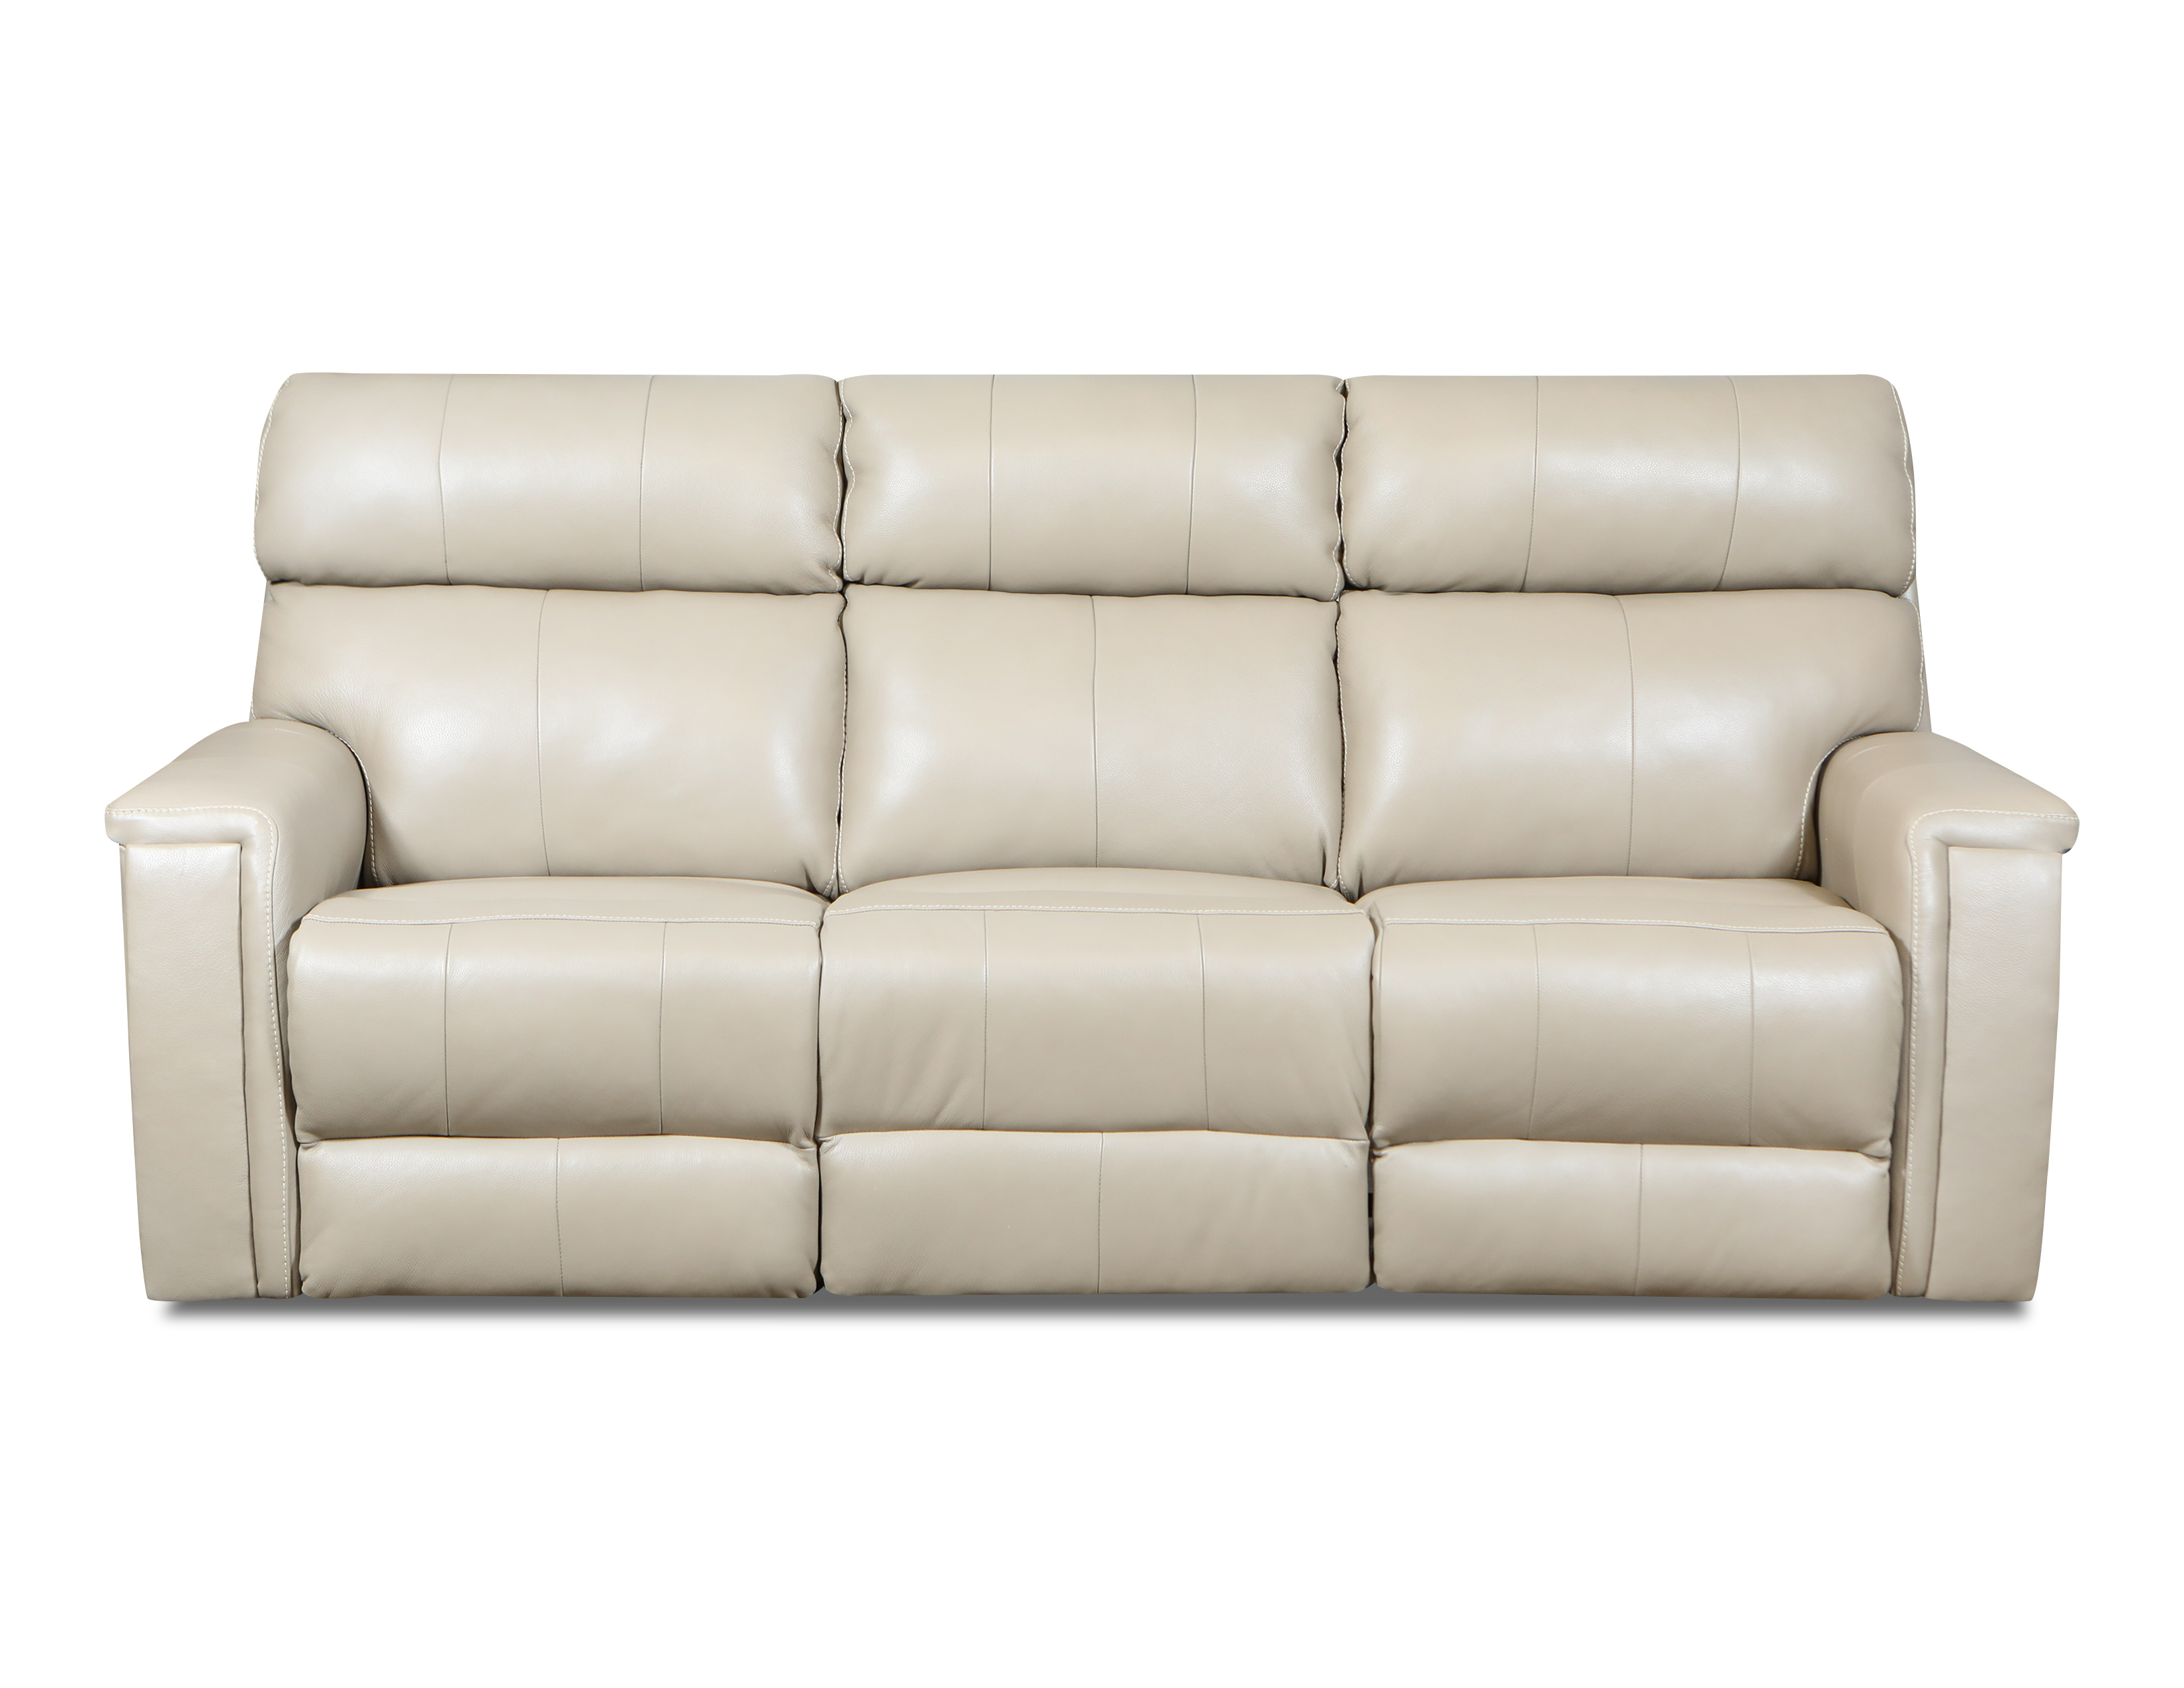 672 Contempo Sectional Image